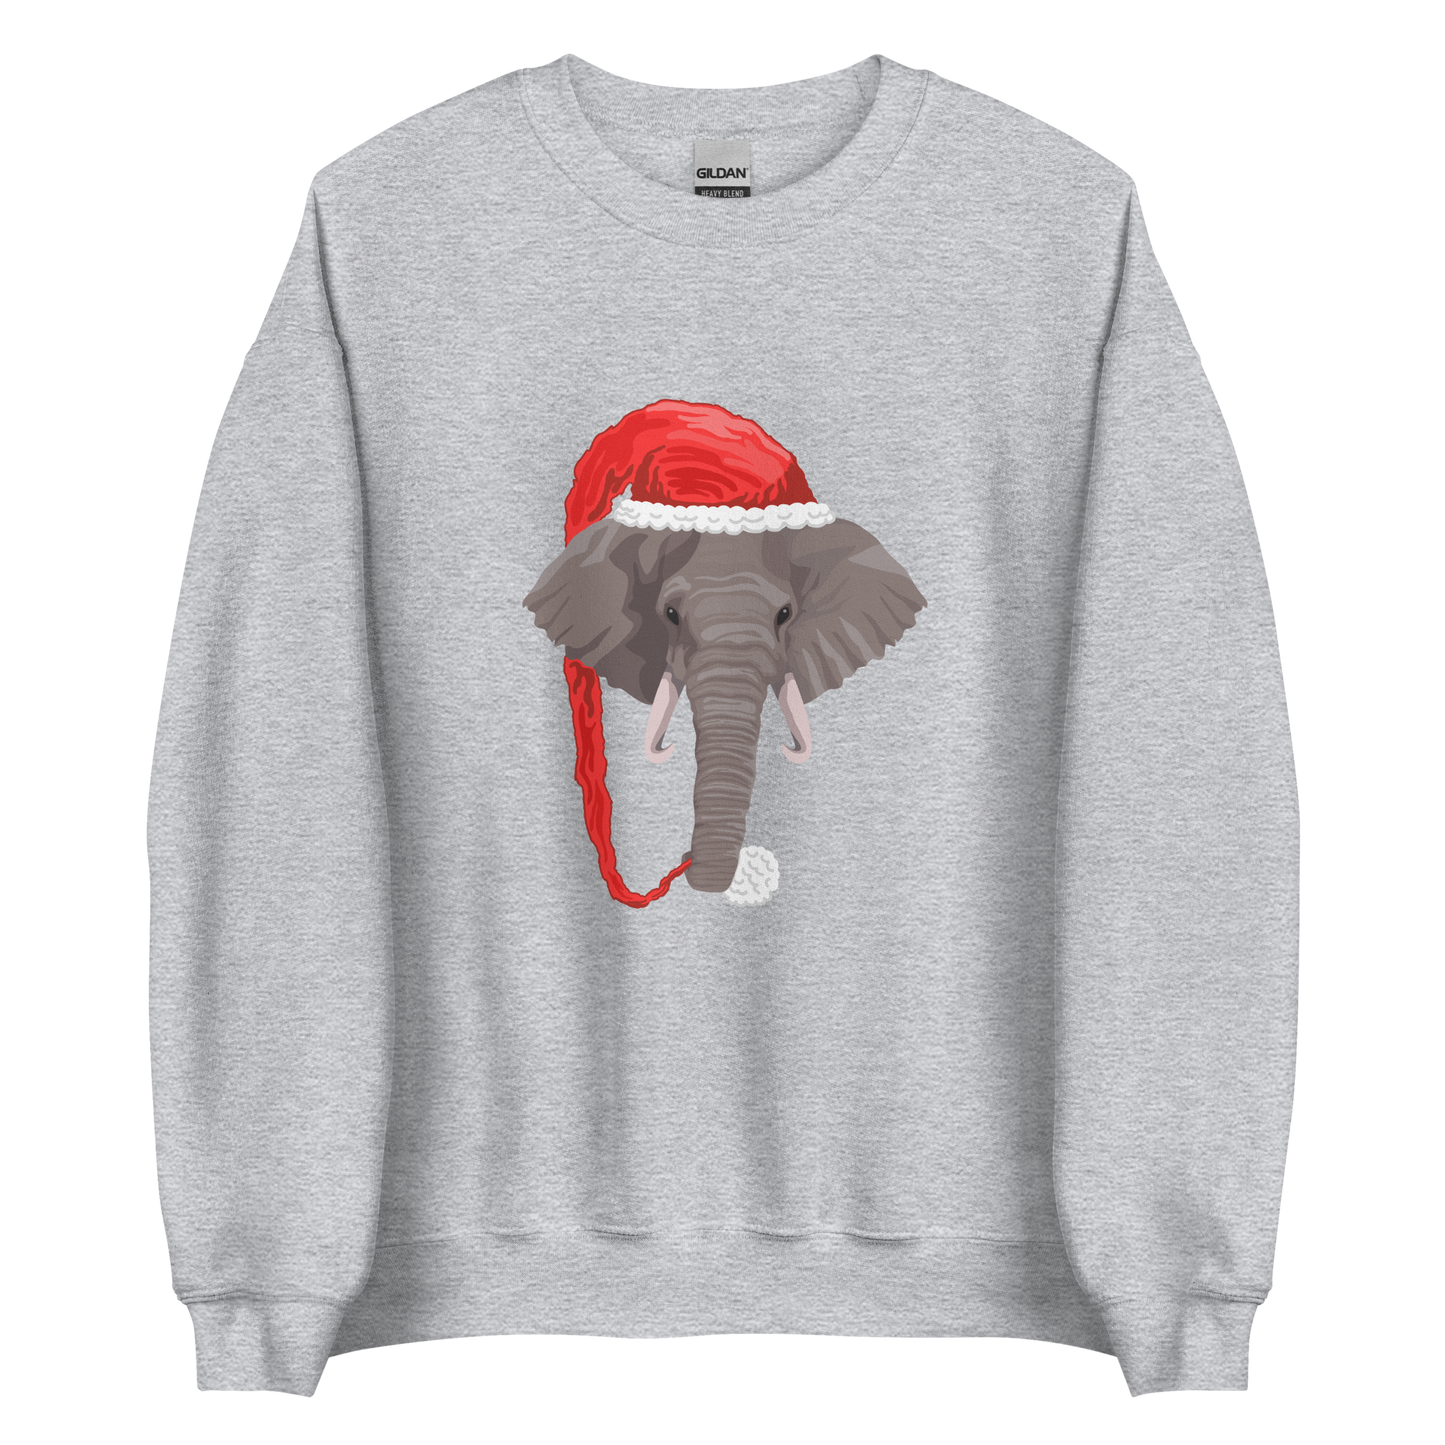 Sport Grey Christmas Elephant Sweatshirt featuring a delight Elephant Wearing an Elf Hat graphic on the chest - Funny Christmas Graphic Elephant Sweatshirts - Boozy Fox